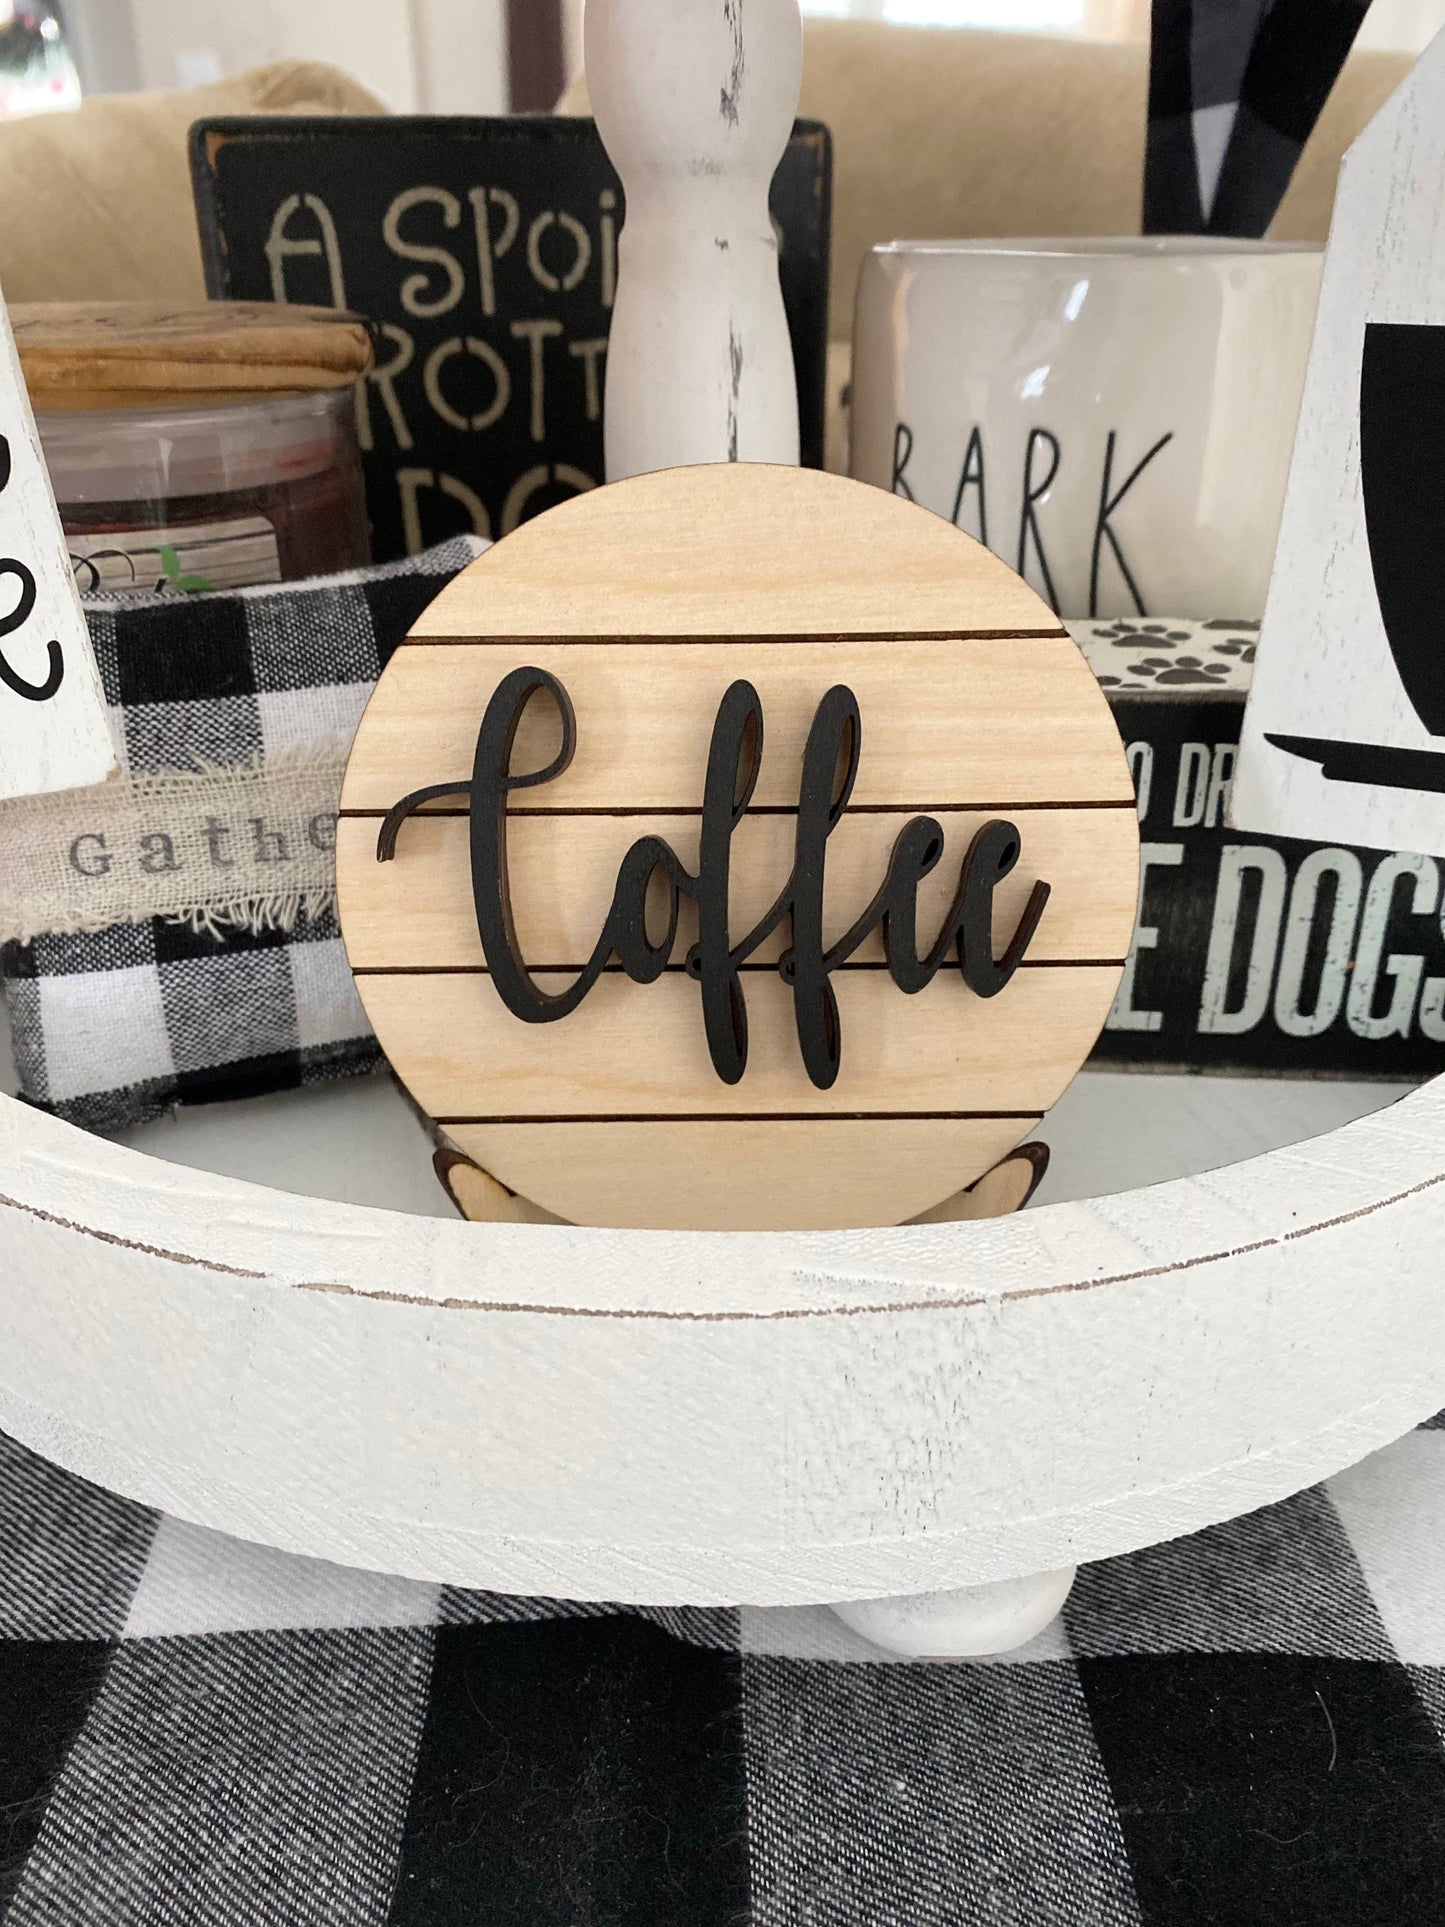 Coffee Tiered Tray Sign, Mini Shiplap Tray Sign, Tiered Tray Decor, 4” Round Tiered Tray Sign, Wood Tiered Tray Sign, Coffee Tray Sign